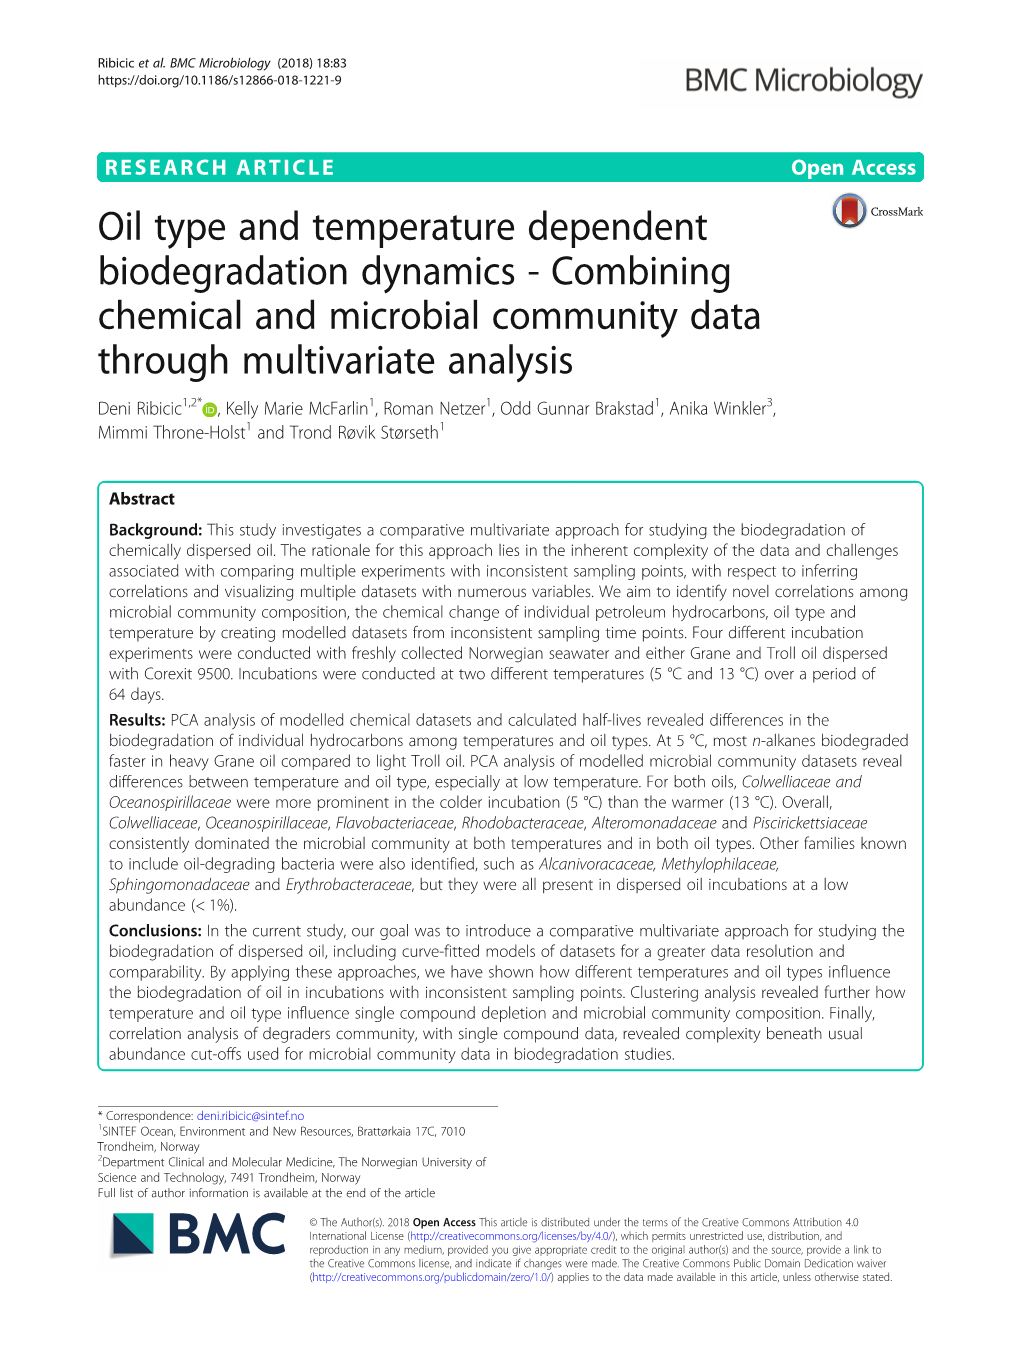 Oil Type and Temperature Dependent Biodegradation Dynamics